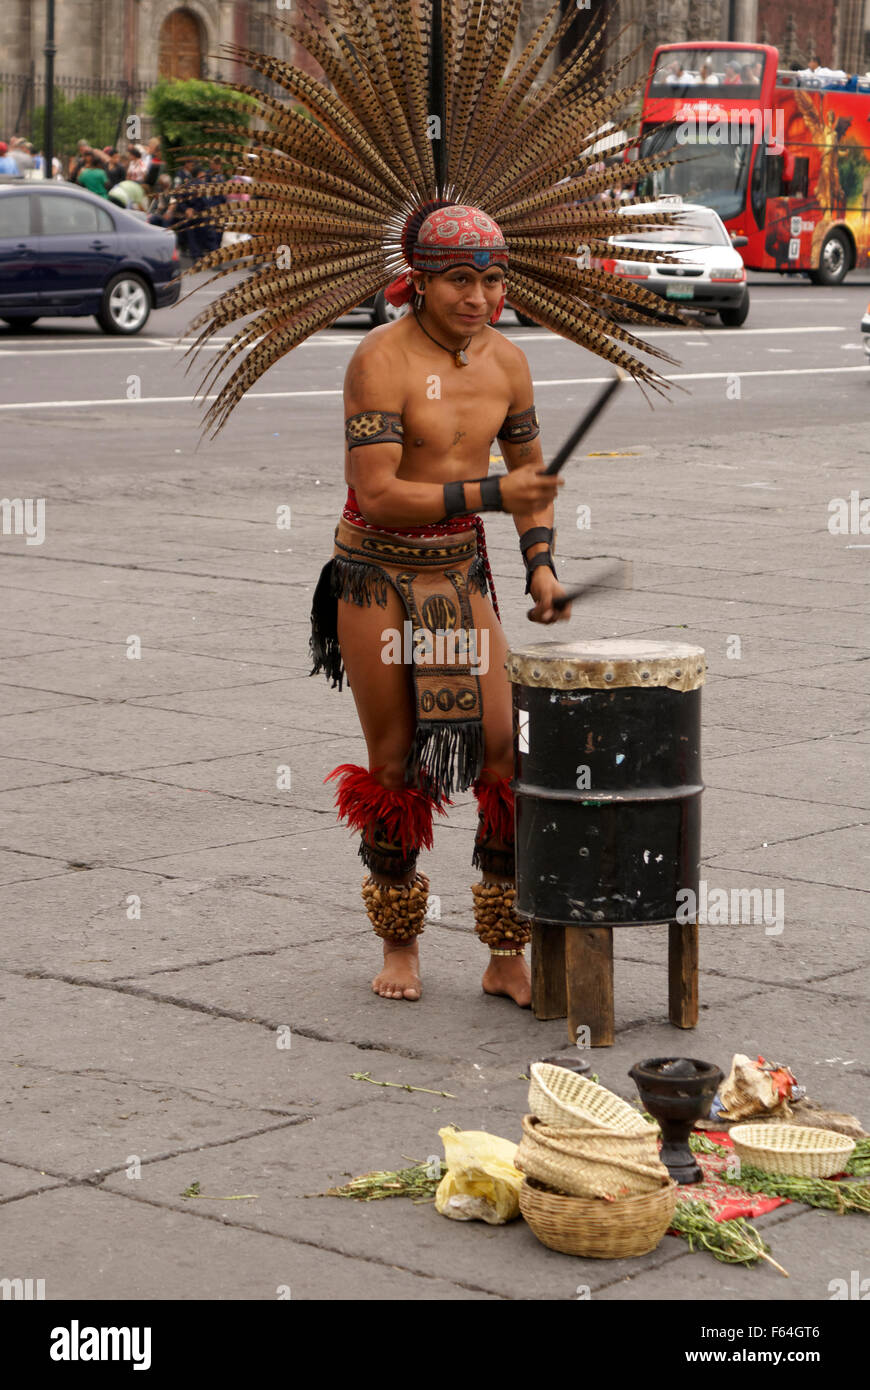 Conchero dancer wearing a feathered headdress beating a drum in downtown Mexico City Stock Photo